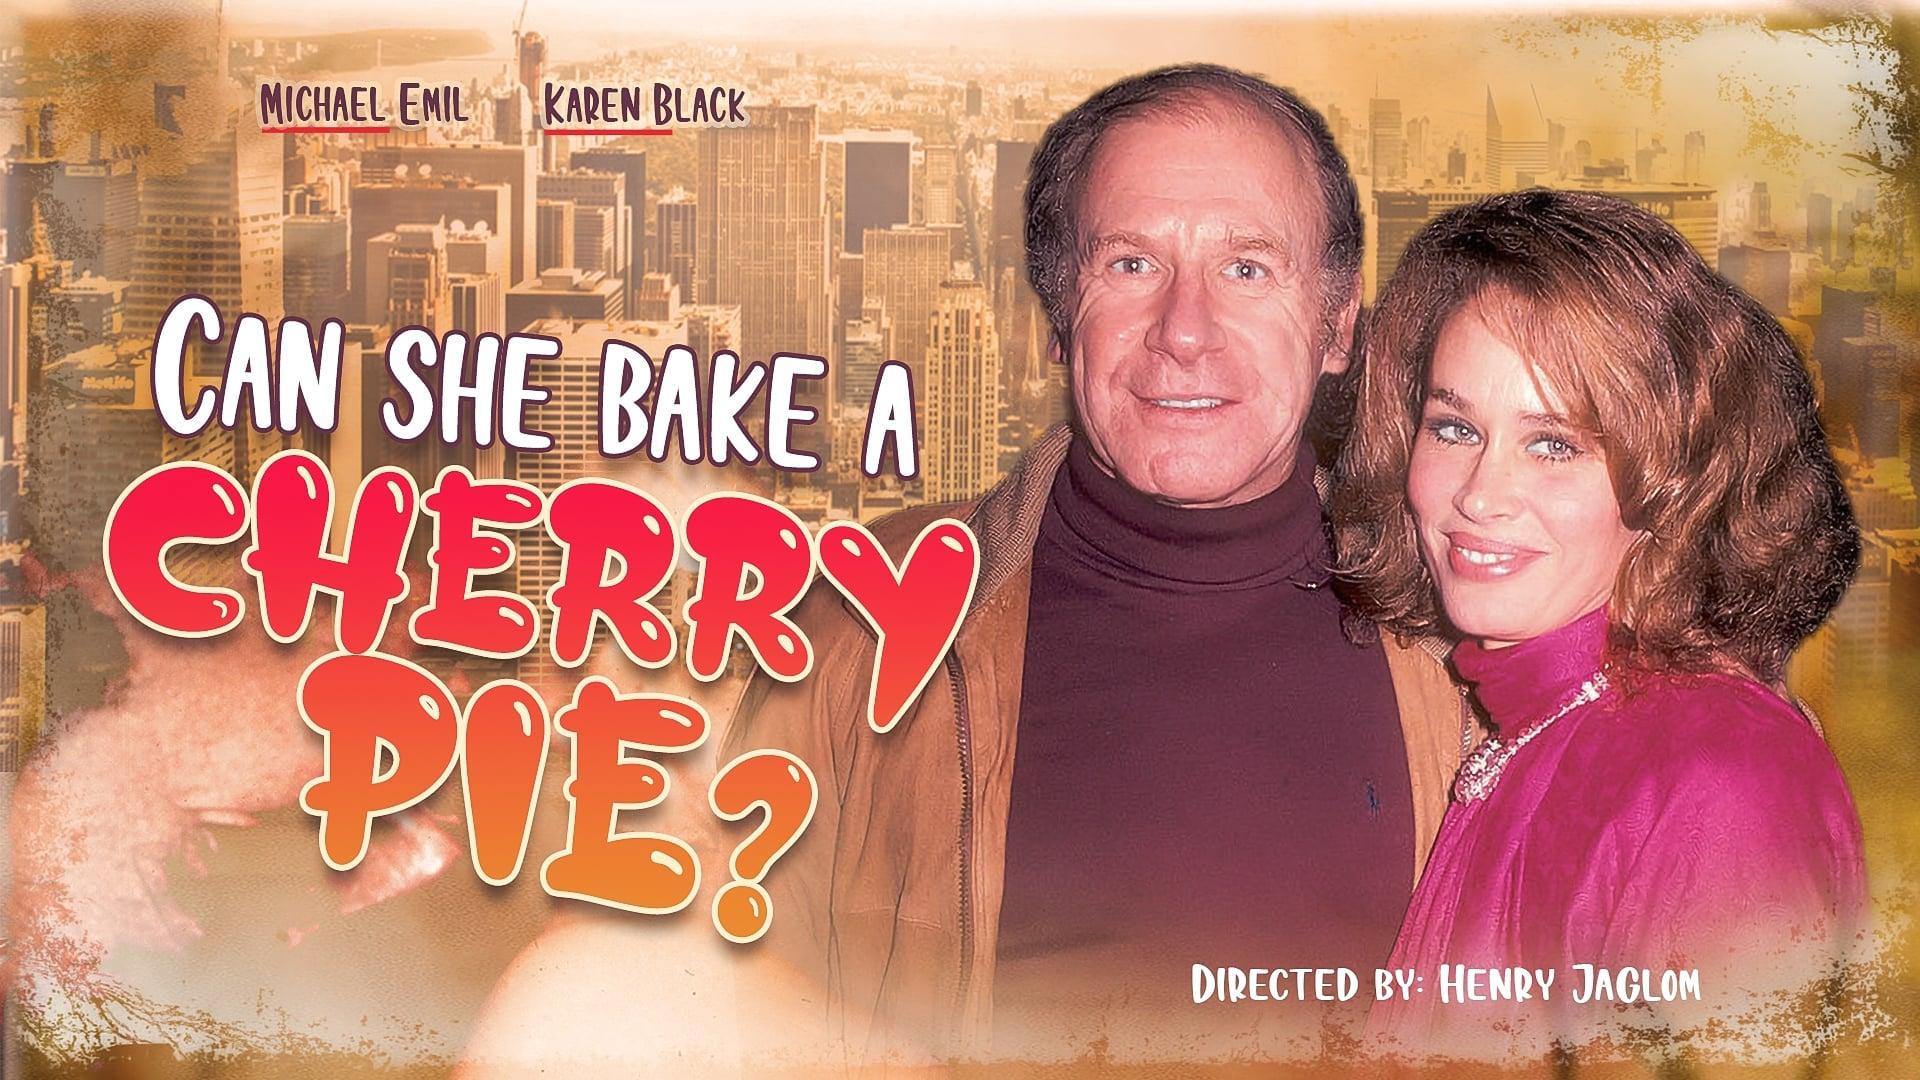 Can She Bake a Cherry Pie? backdrop